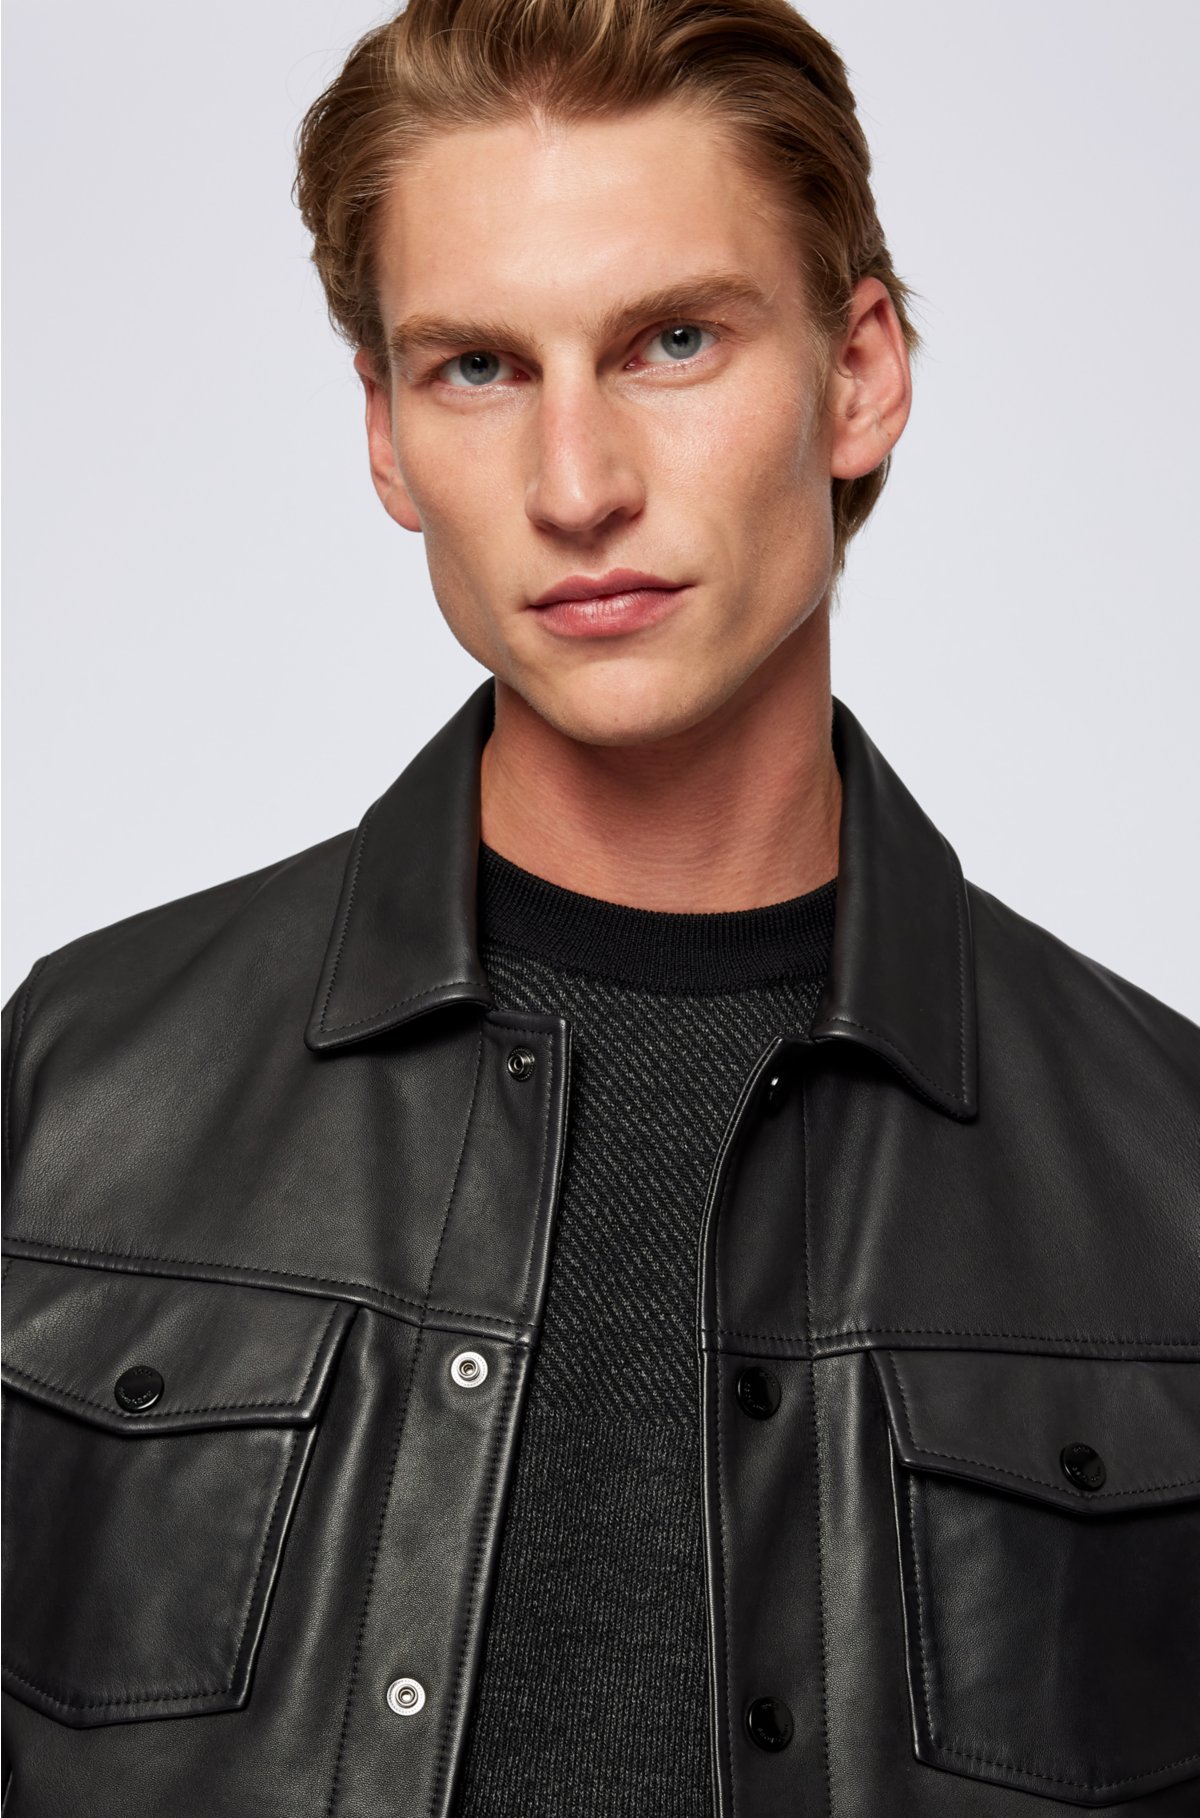 Patchworked Portrait Mixed Leather And Cotton Jacket - Men - Ready-to-Wear